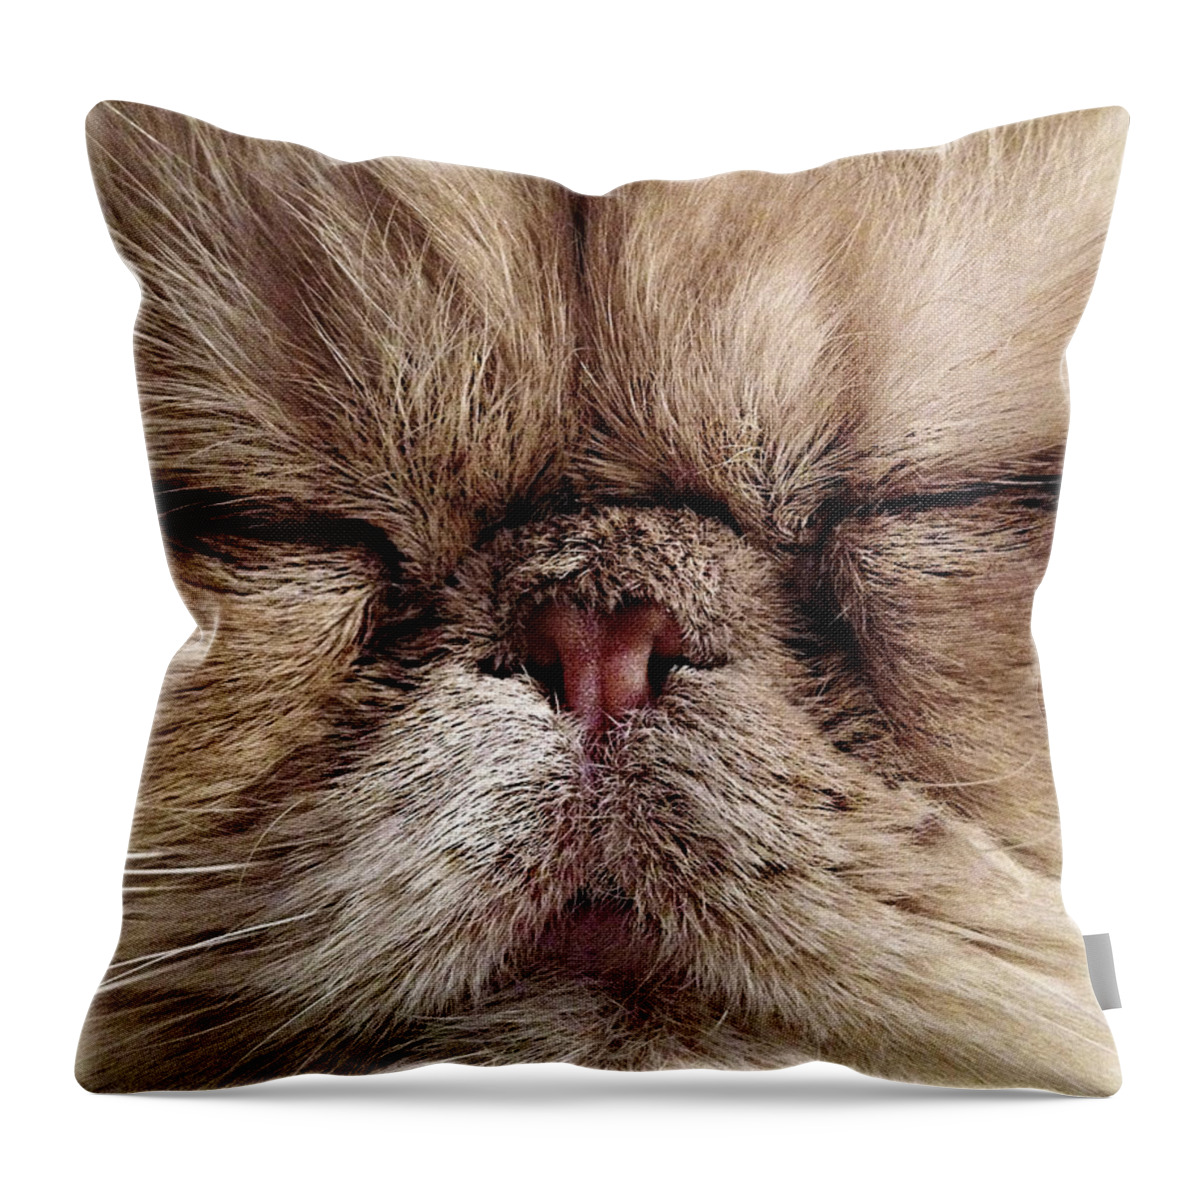 Pets Throw Pillow featuring the photograph Close-up Of Cat by Copyright Ania Jones.